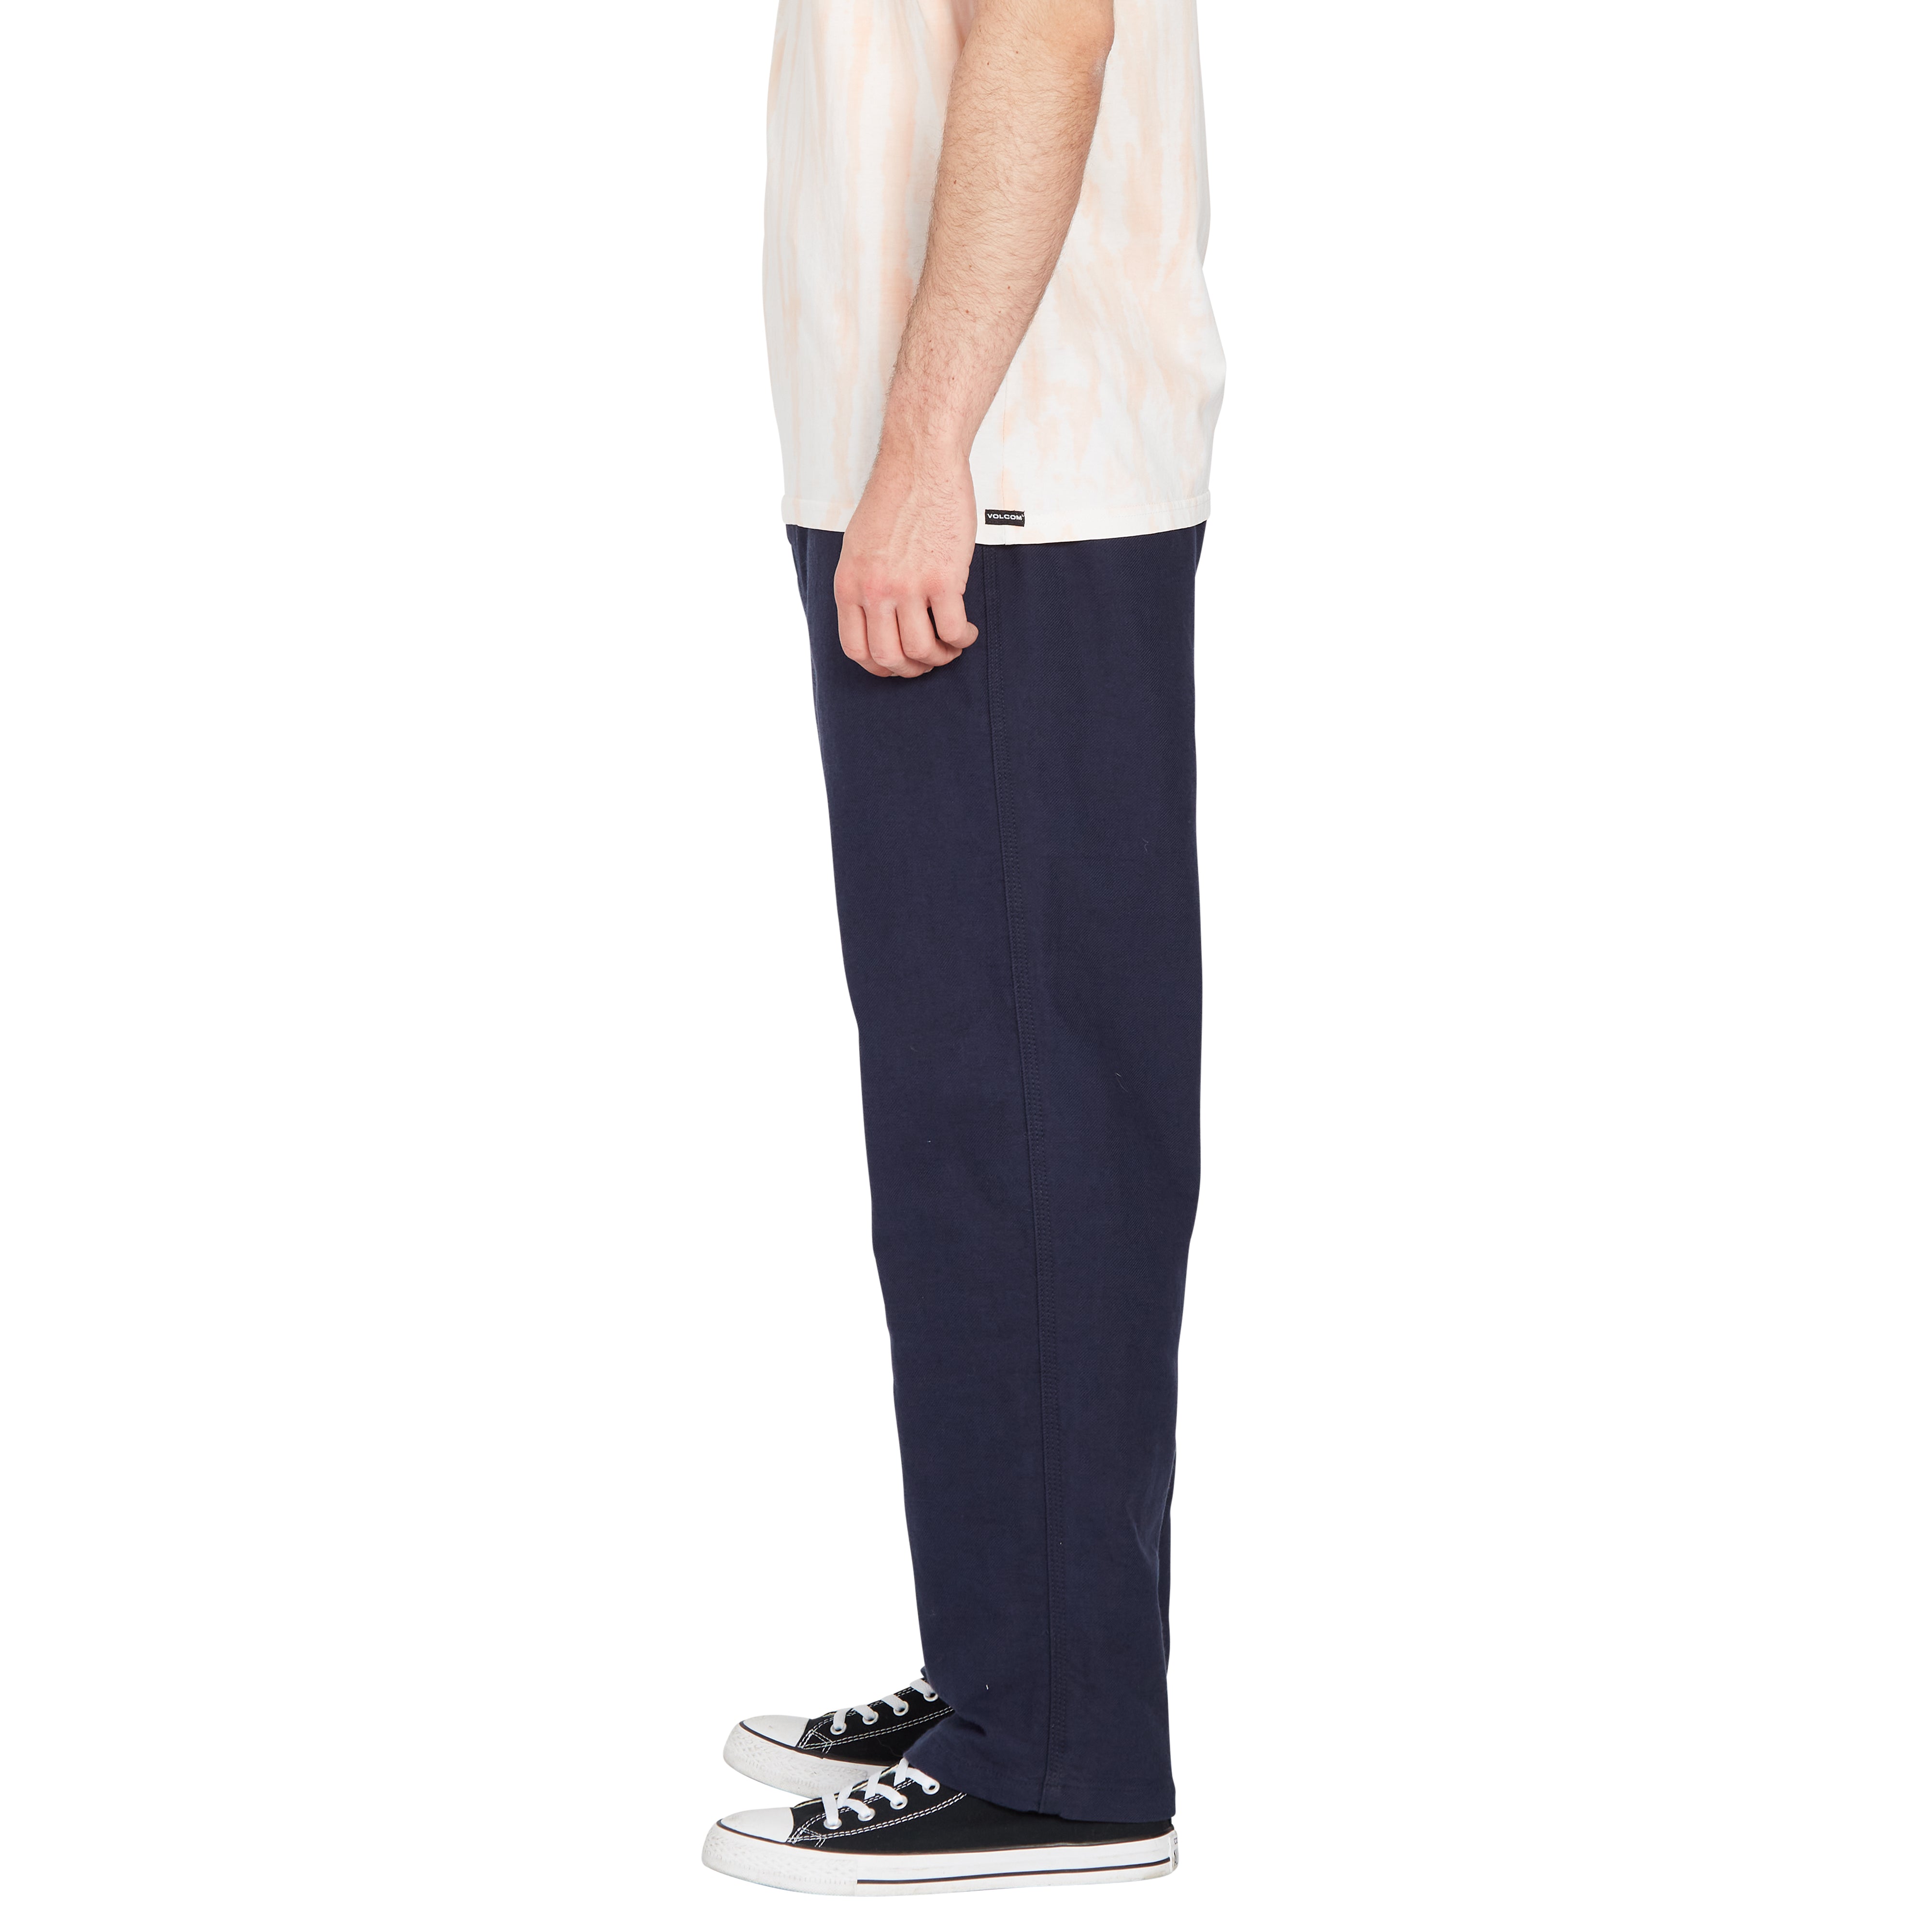 Skate Vitals Axel Loose Tapered Pants Navy – Stoked Boardshop